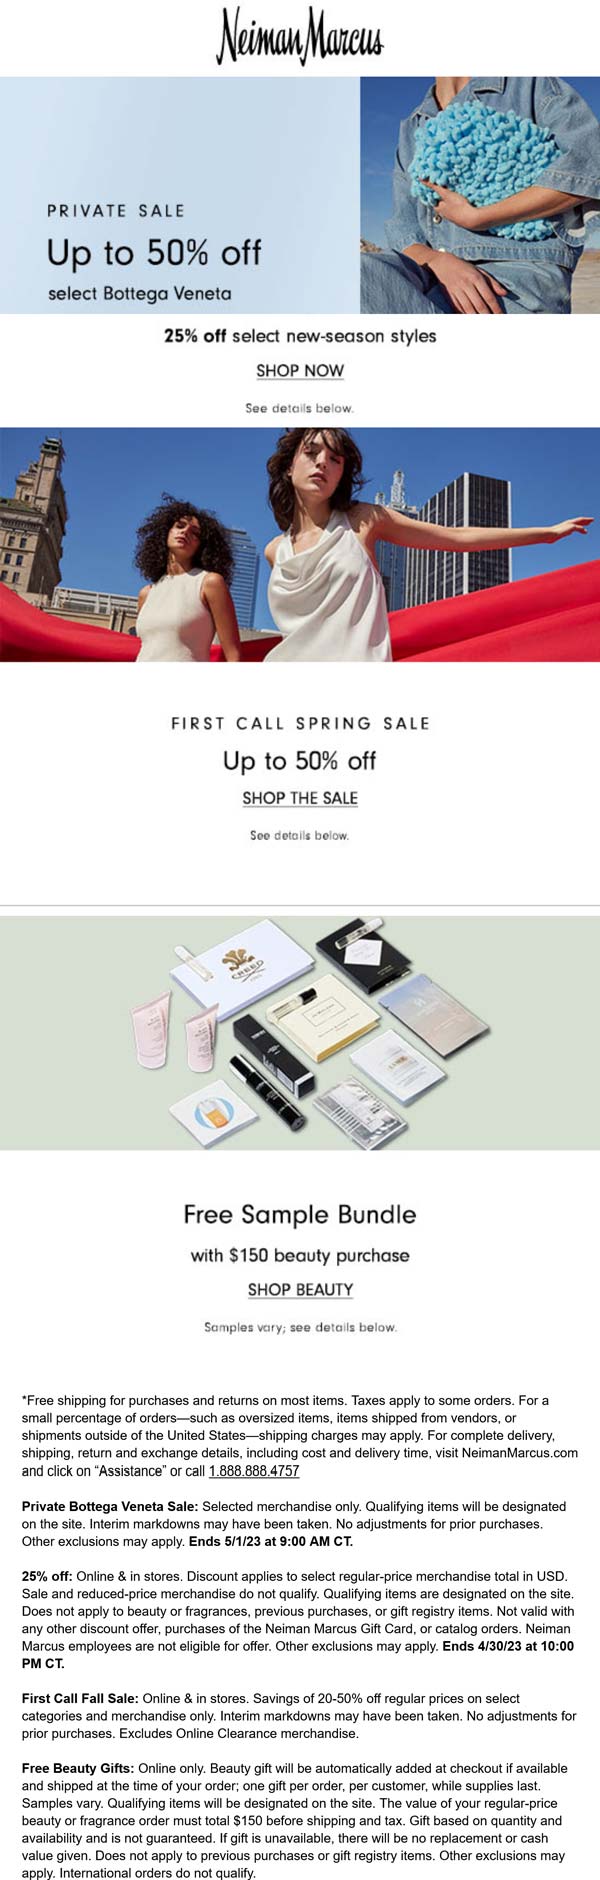 Neiman Marcus stores Coupon  Free beauty gifts on $150 & more at Neiman Marcus #neimanmarcus 